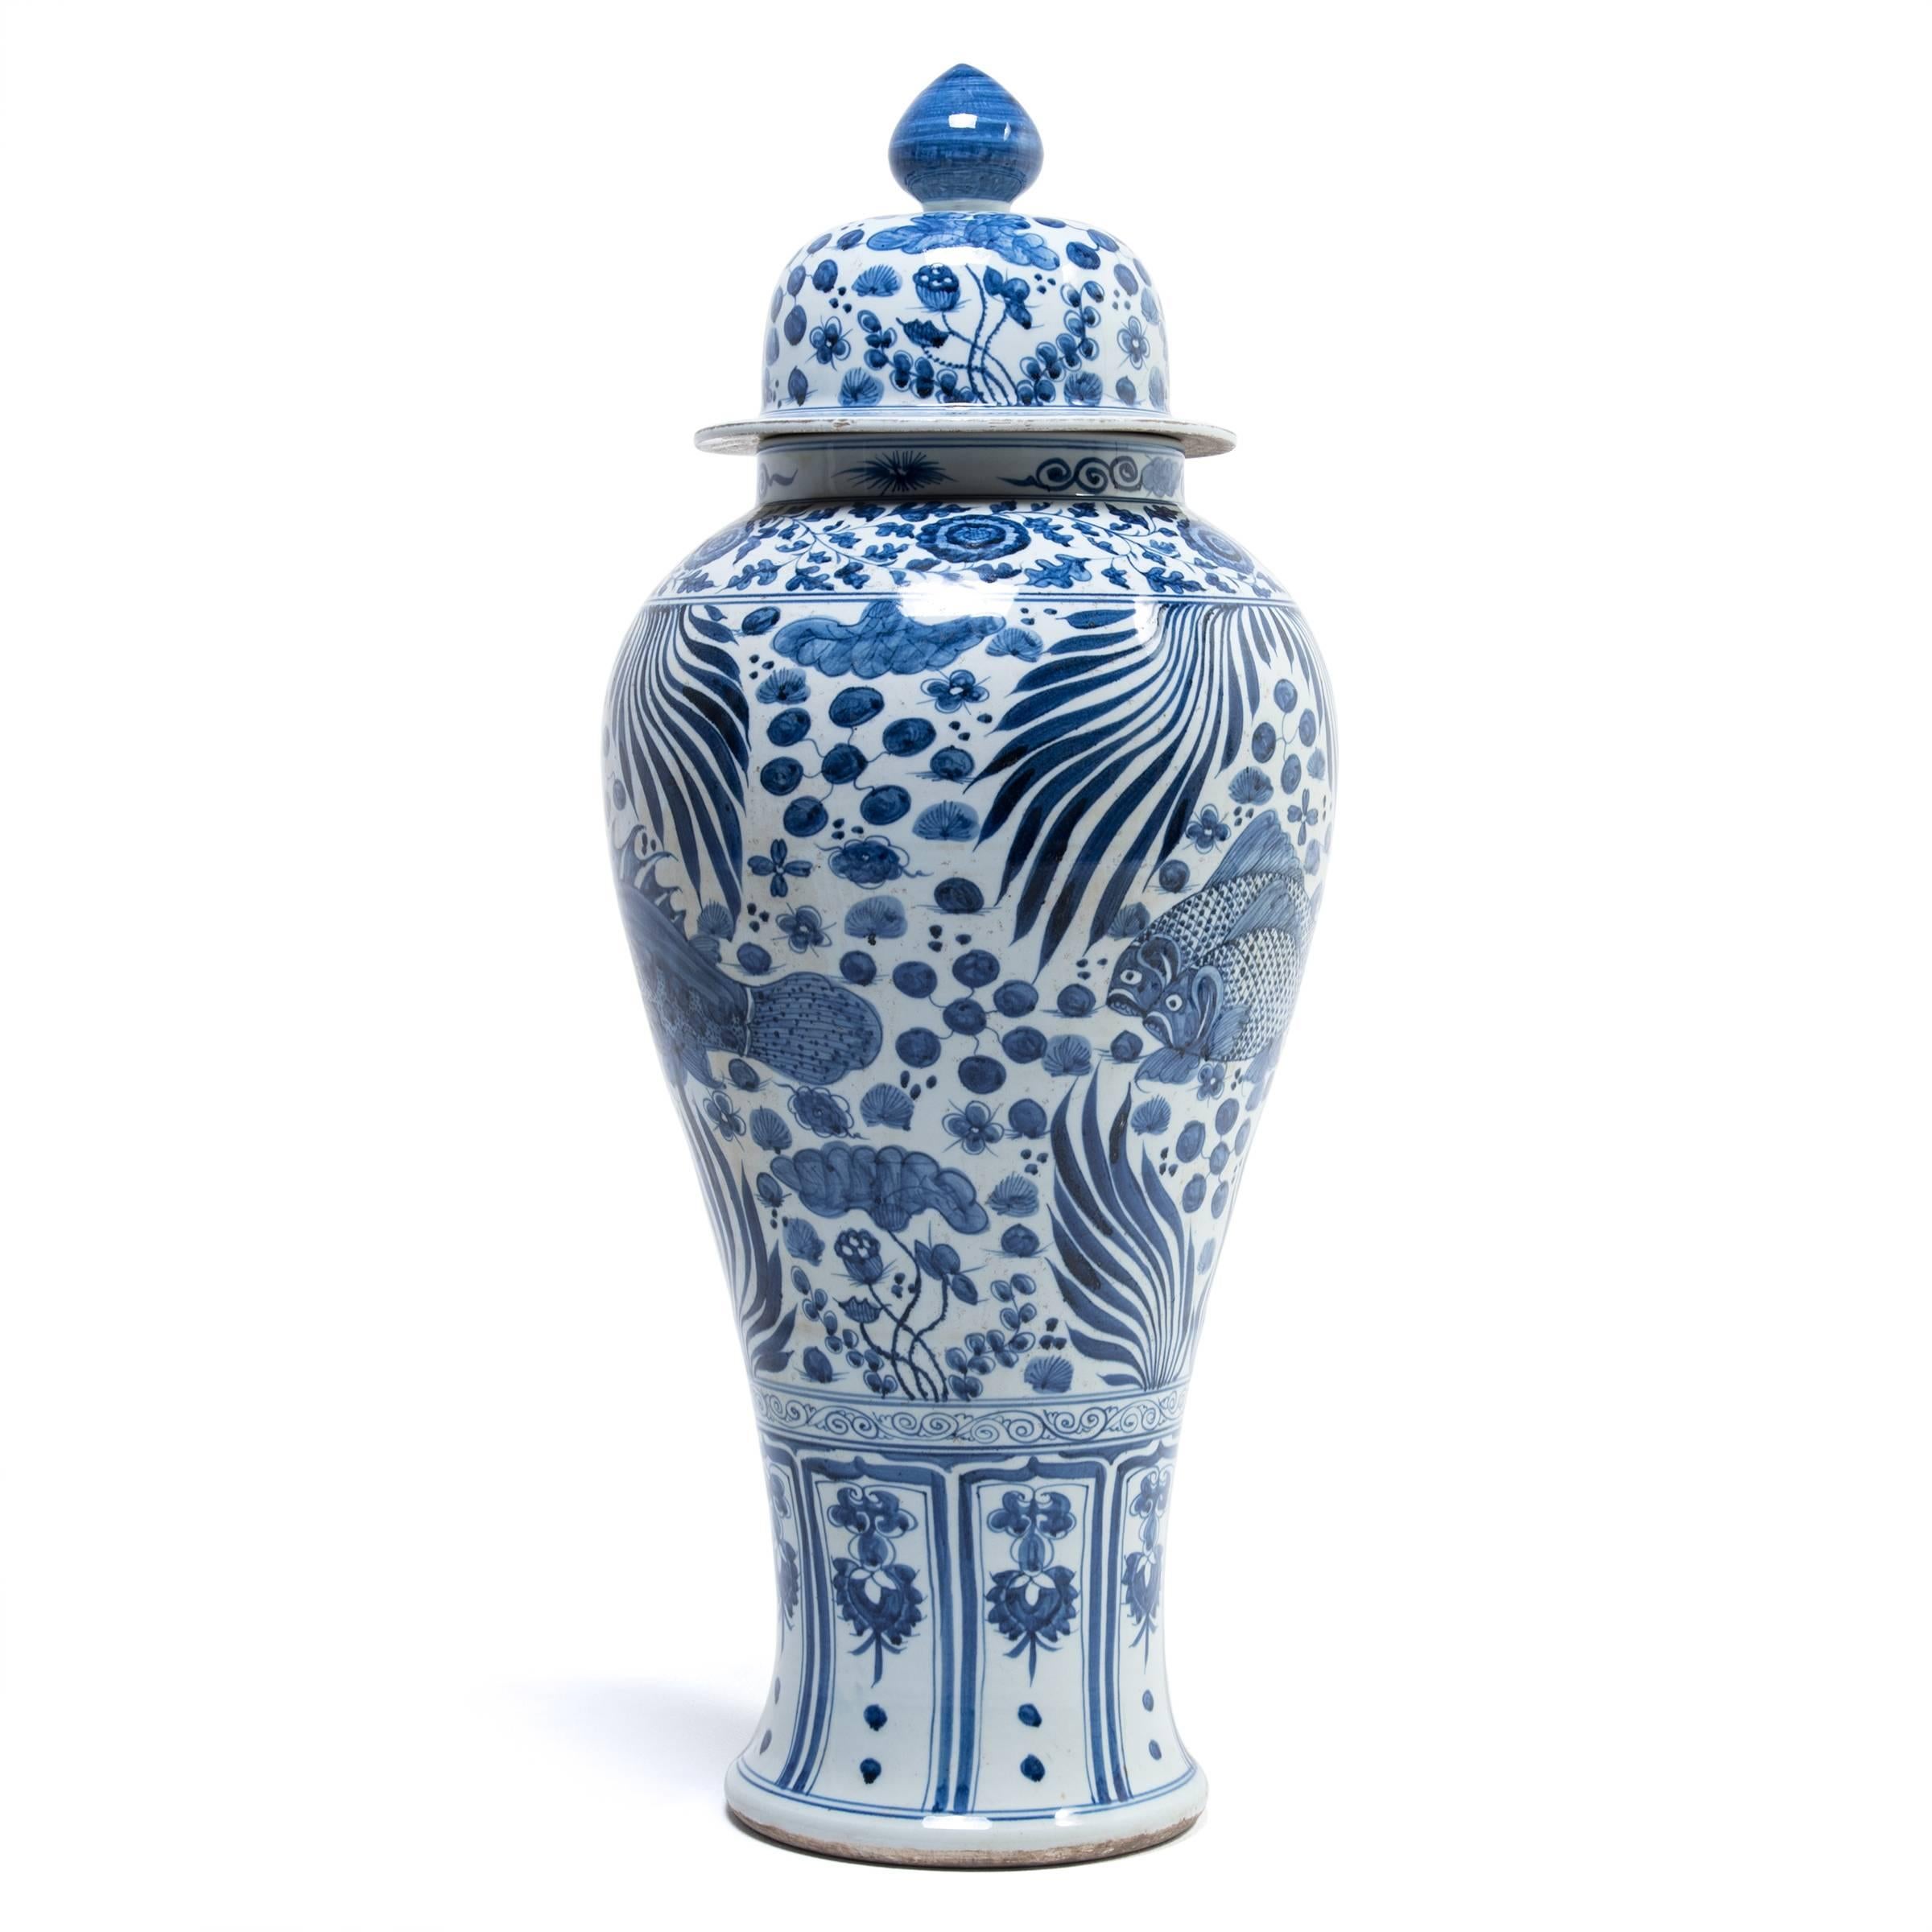 Revered for centuries for its elegant designs in rich cobalt blue on pure white, traditional Chinese blue-and-white porcelain lives on in this contemporary sea-inspired ginger jar. Intricately painted, the jar depicts a vibrant underwater world,